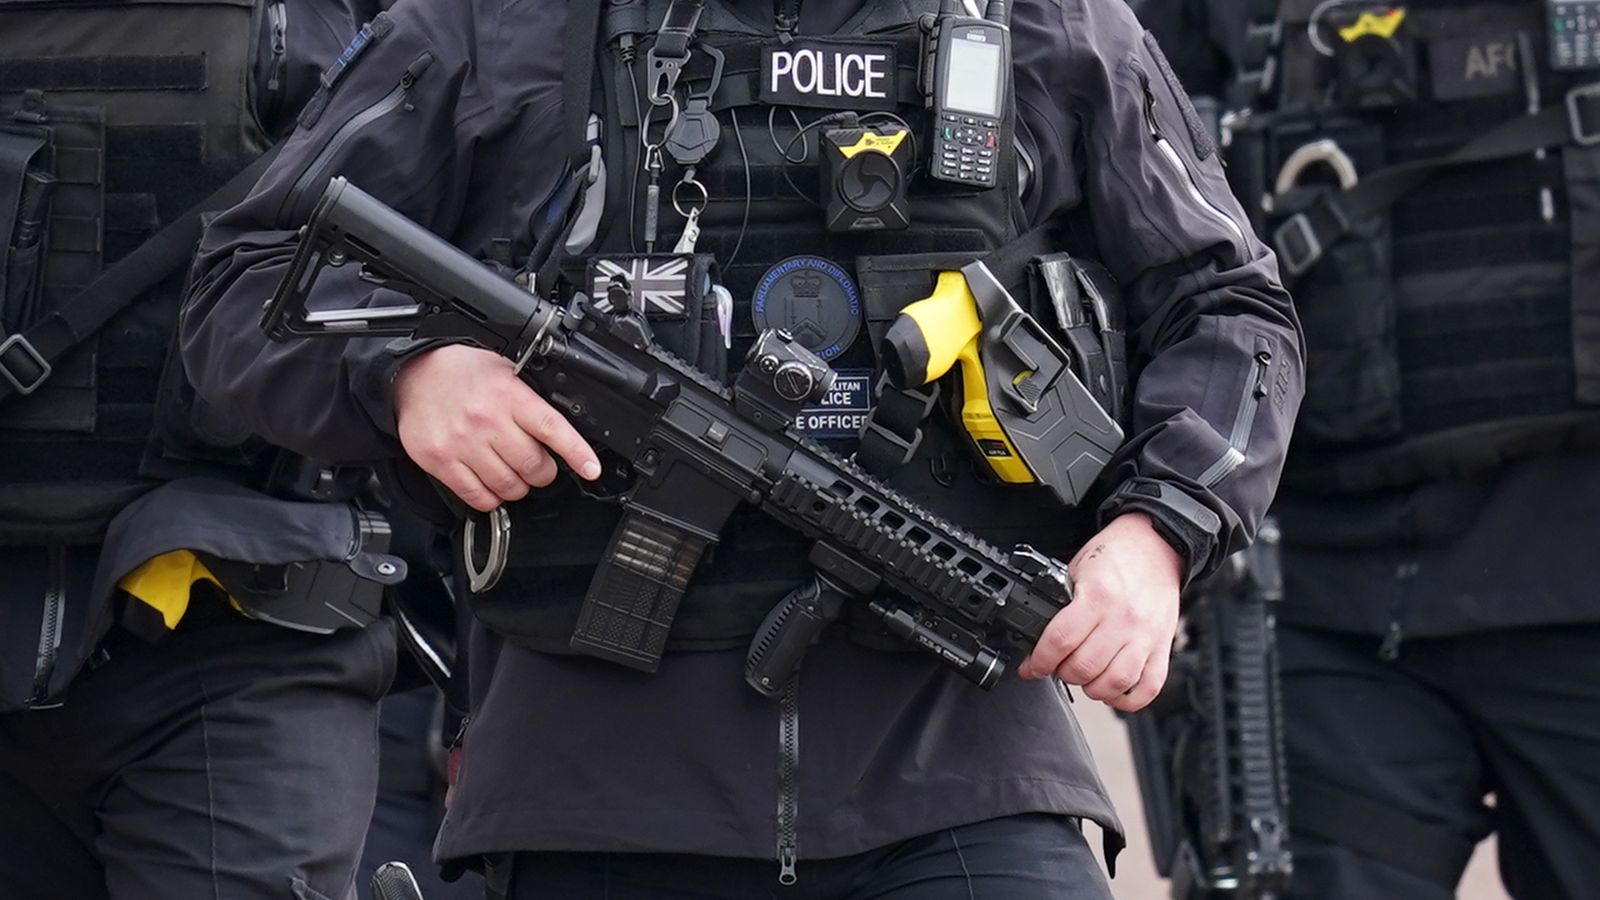 Met Police chief calls for more legal protections as army on standby to replace firearms officers